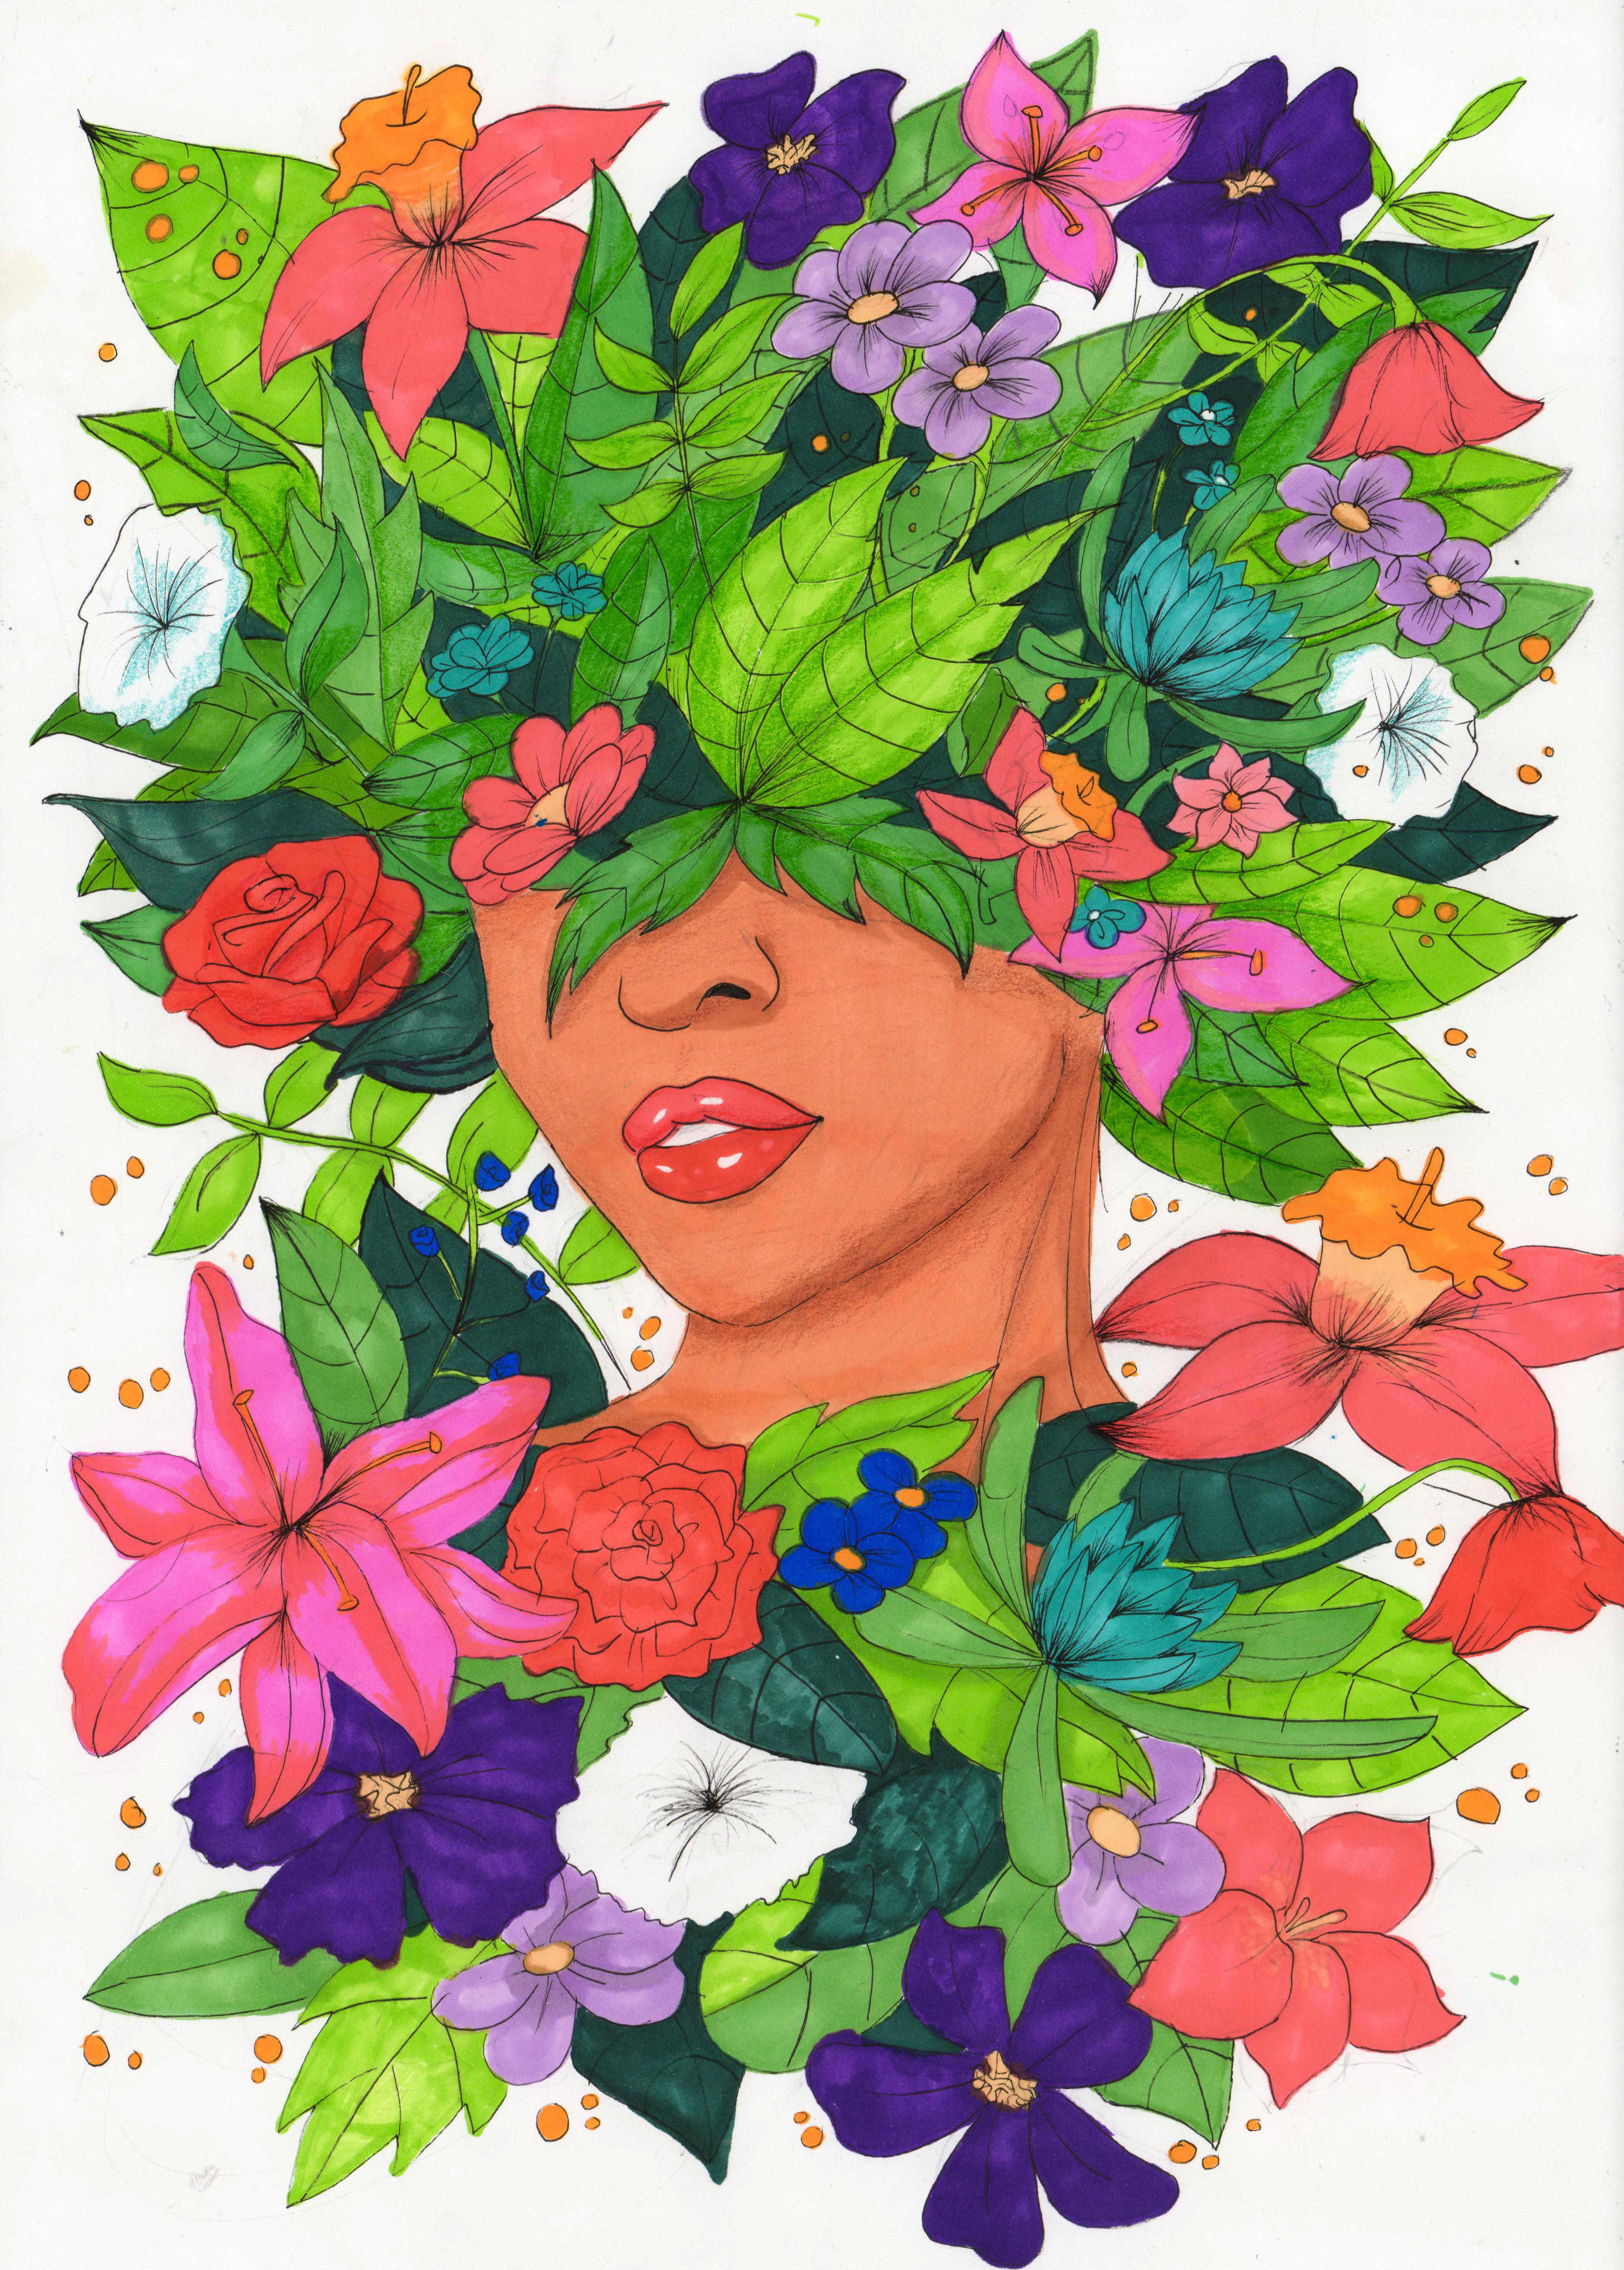 Alcohol marker portrait of a female face with slightly opened red lips, facing the viewer. The subject is completely obscured by leaves and flowers except for her nose, lower jaw, and neck. Red, violet, blue, pink, and white flowers are arranged around the head and shoulders like a wreath. Dense green leaves fully cover the eyes.